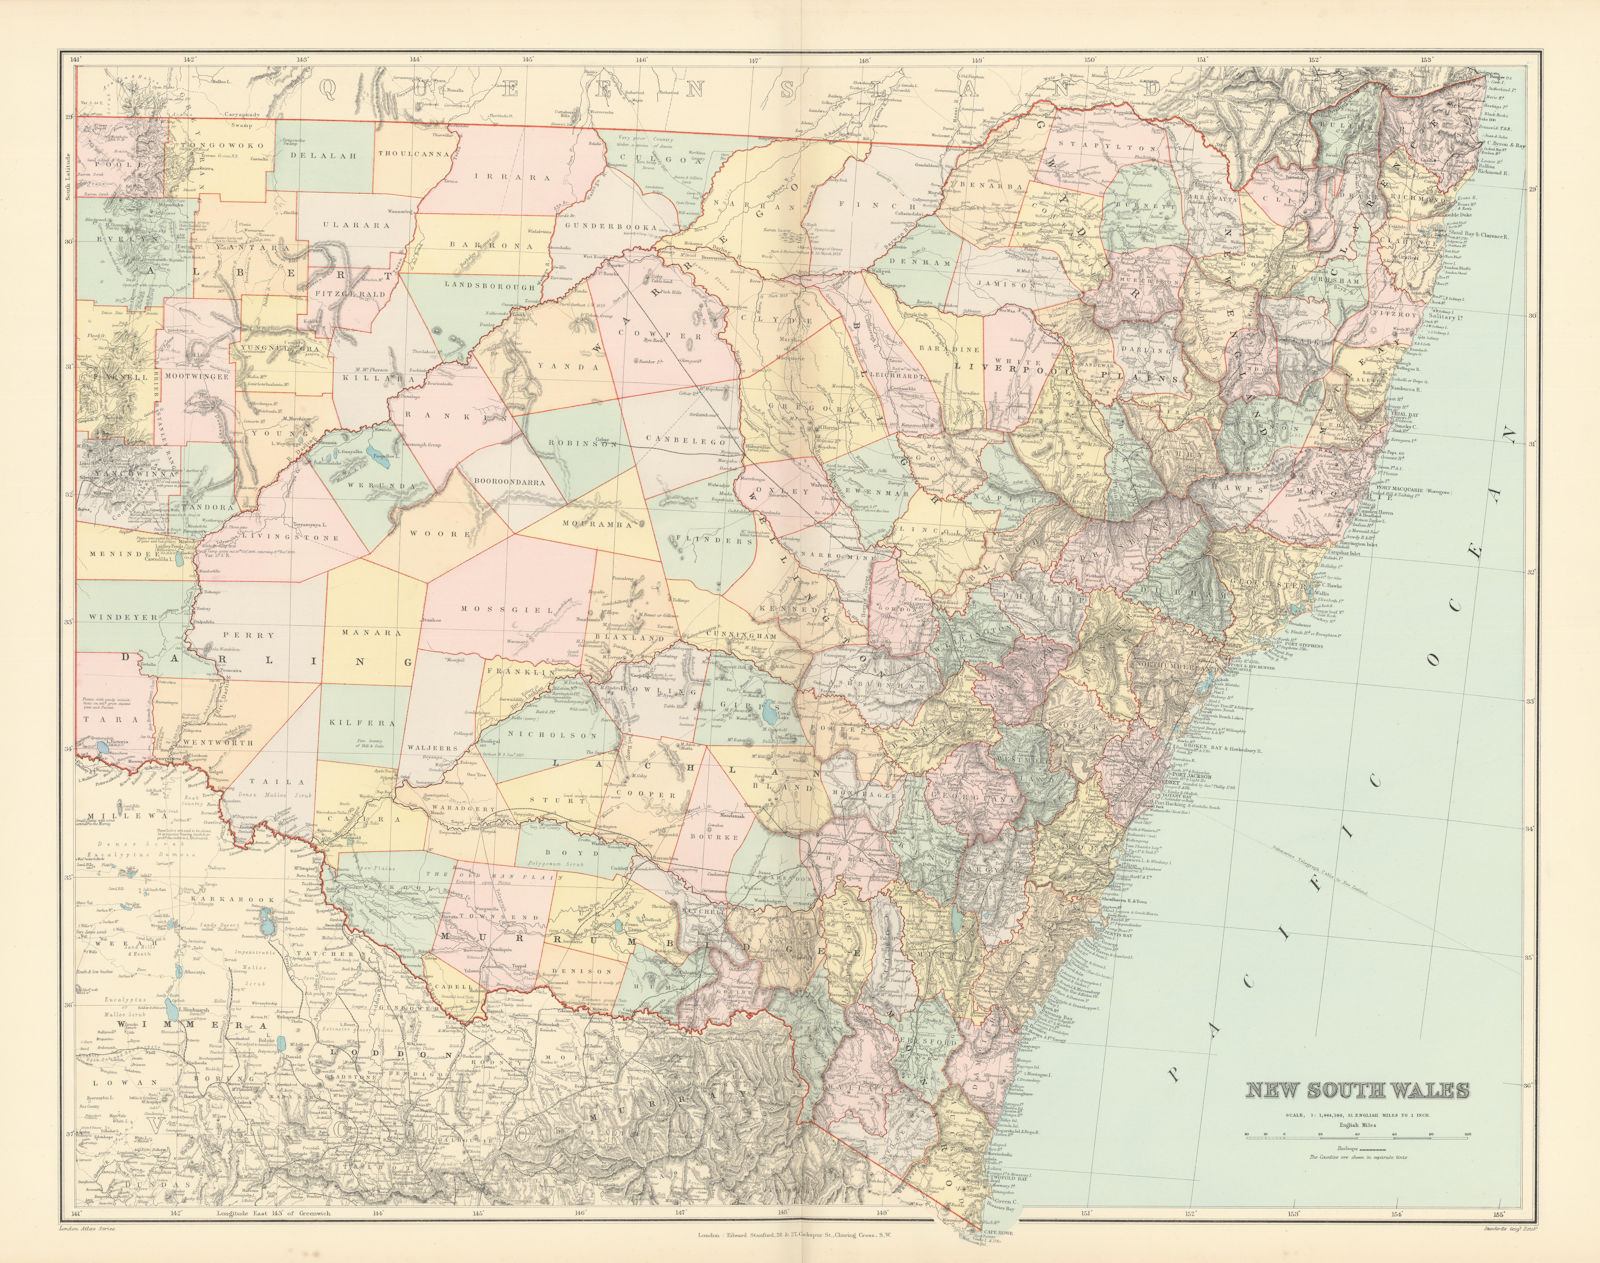 Associate Product New South Wales showing counties & railways. 53x65cm. STANFORD 1896 old map